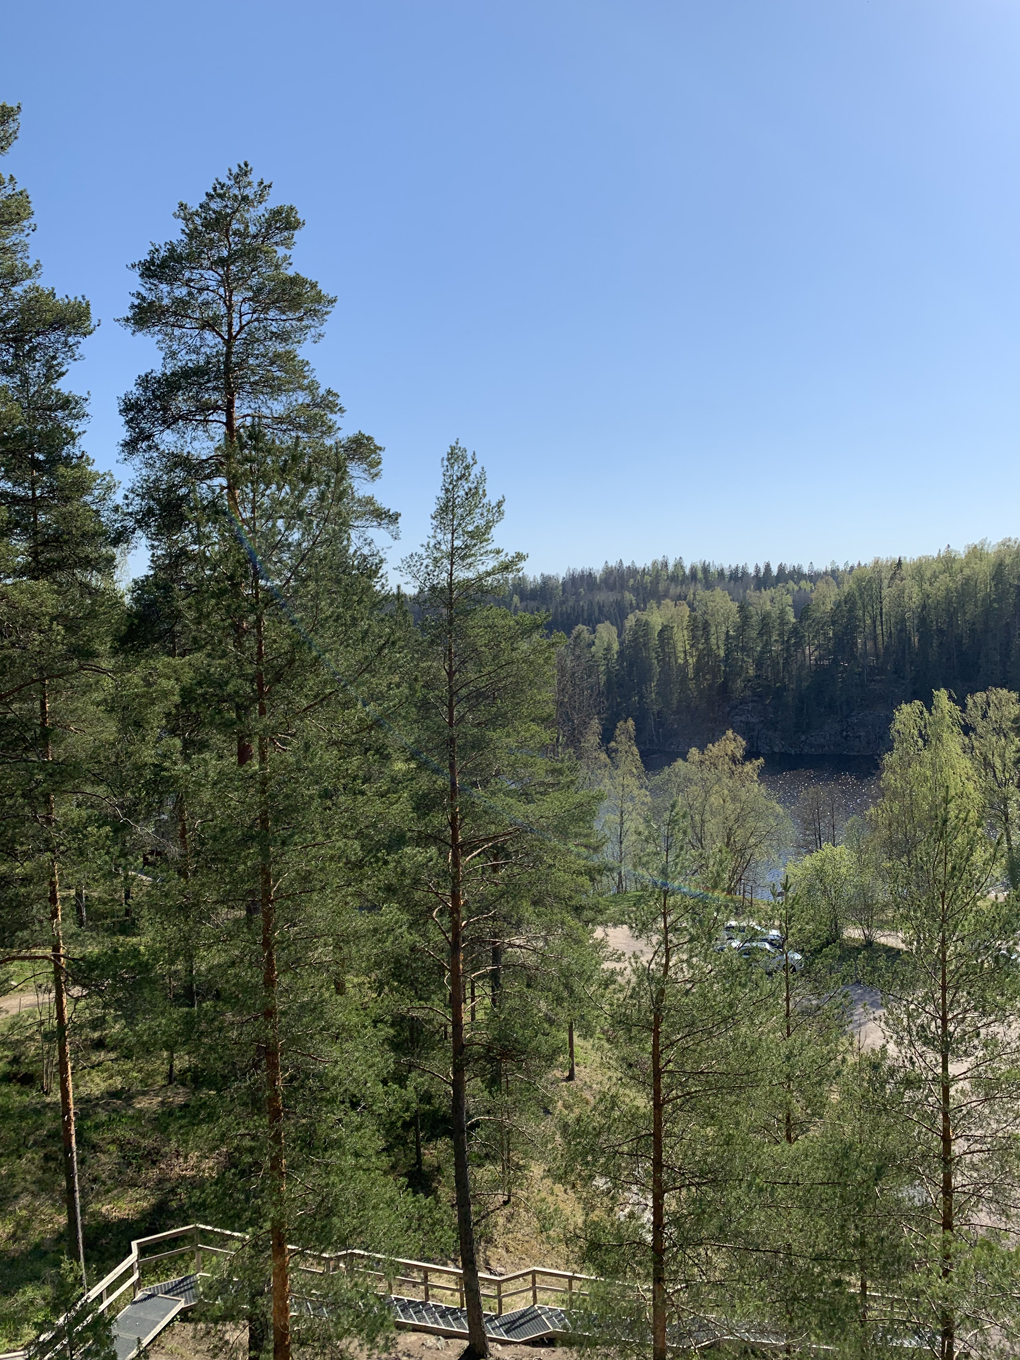 Forest view of treetop with a lake visible below.